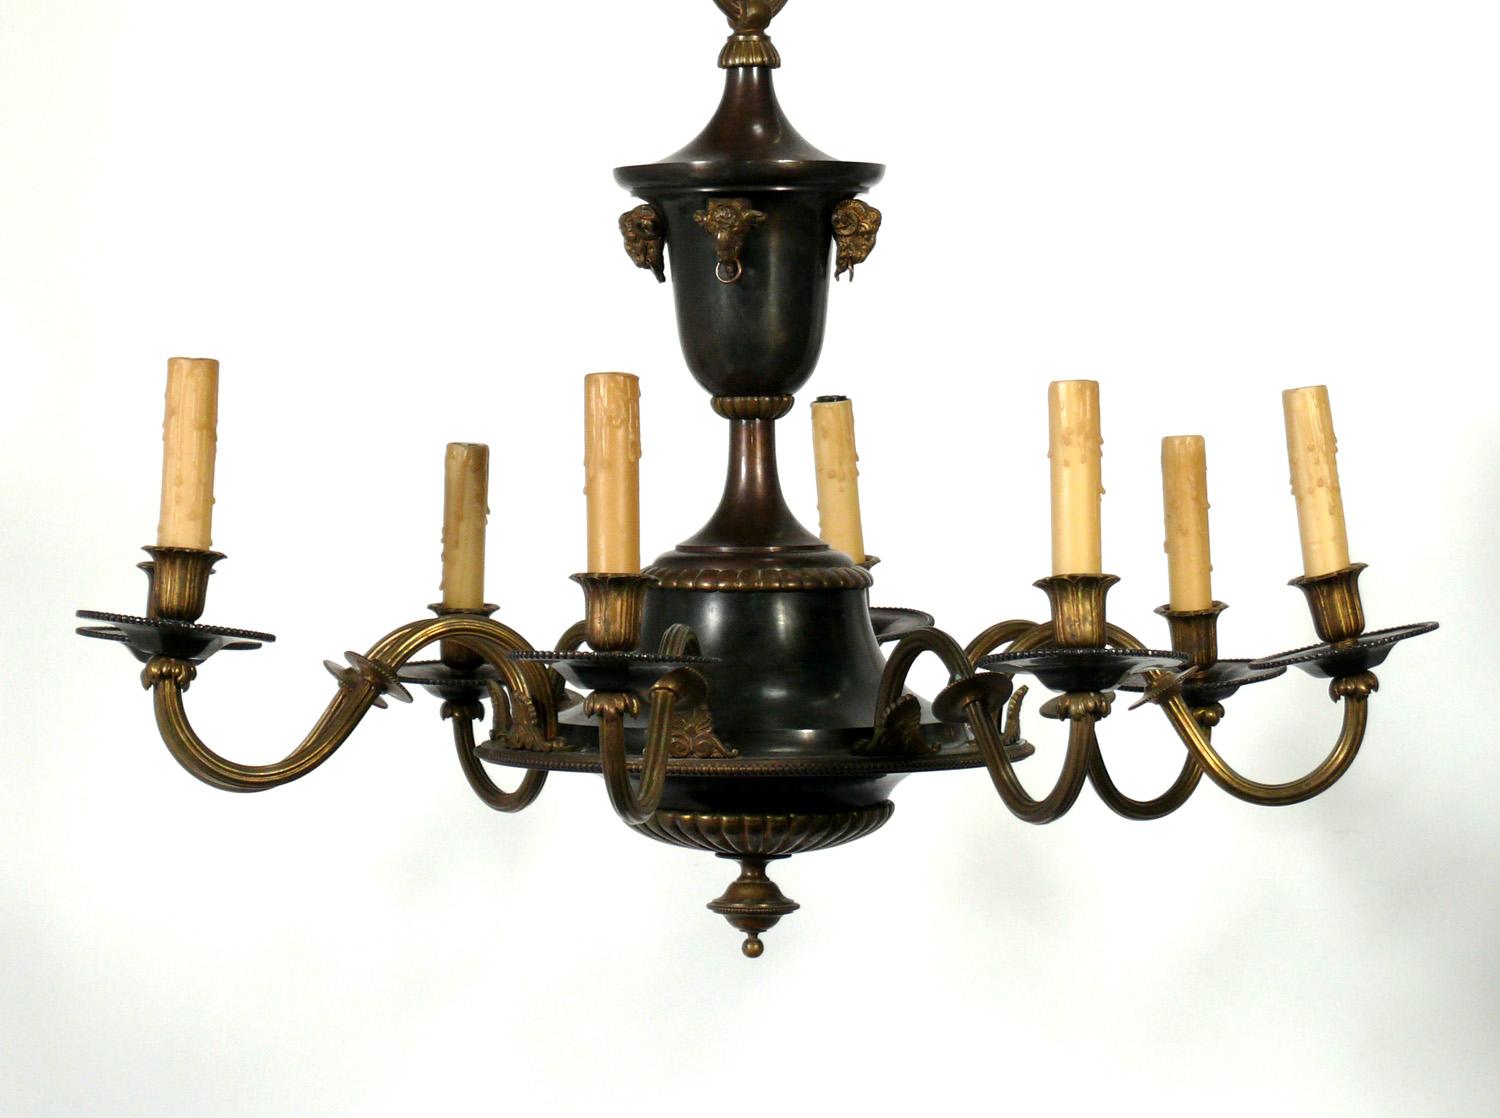 French Empire style eight arm bronze chandelier with ram’s head details, France, circa 1930s. Rewired and ready to mount. This eight light chandelier has scroll and acanthus leaf details at each fluted and curved arm. The bobeches have a faceted